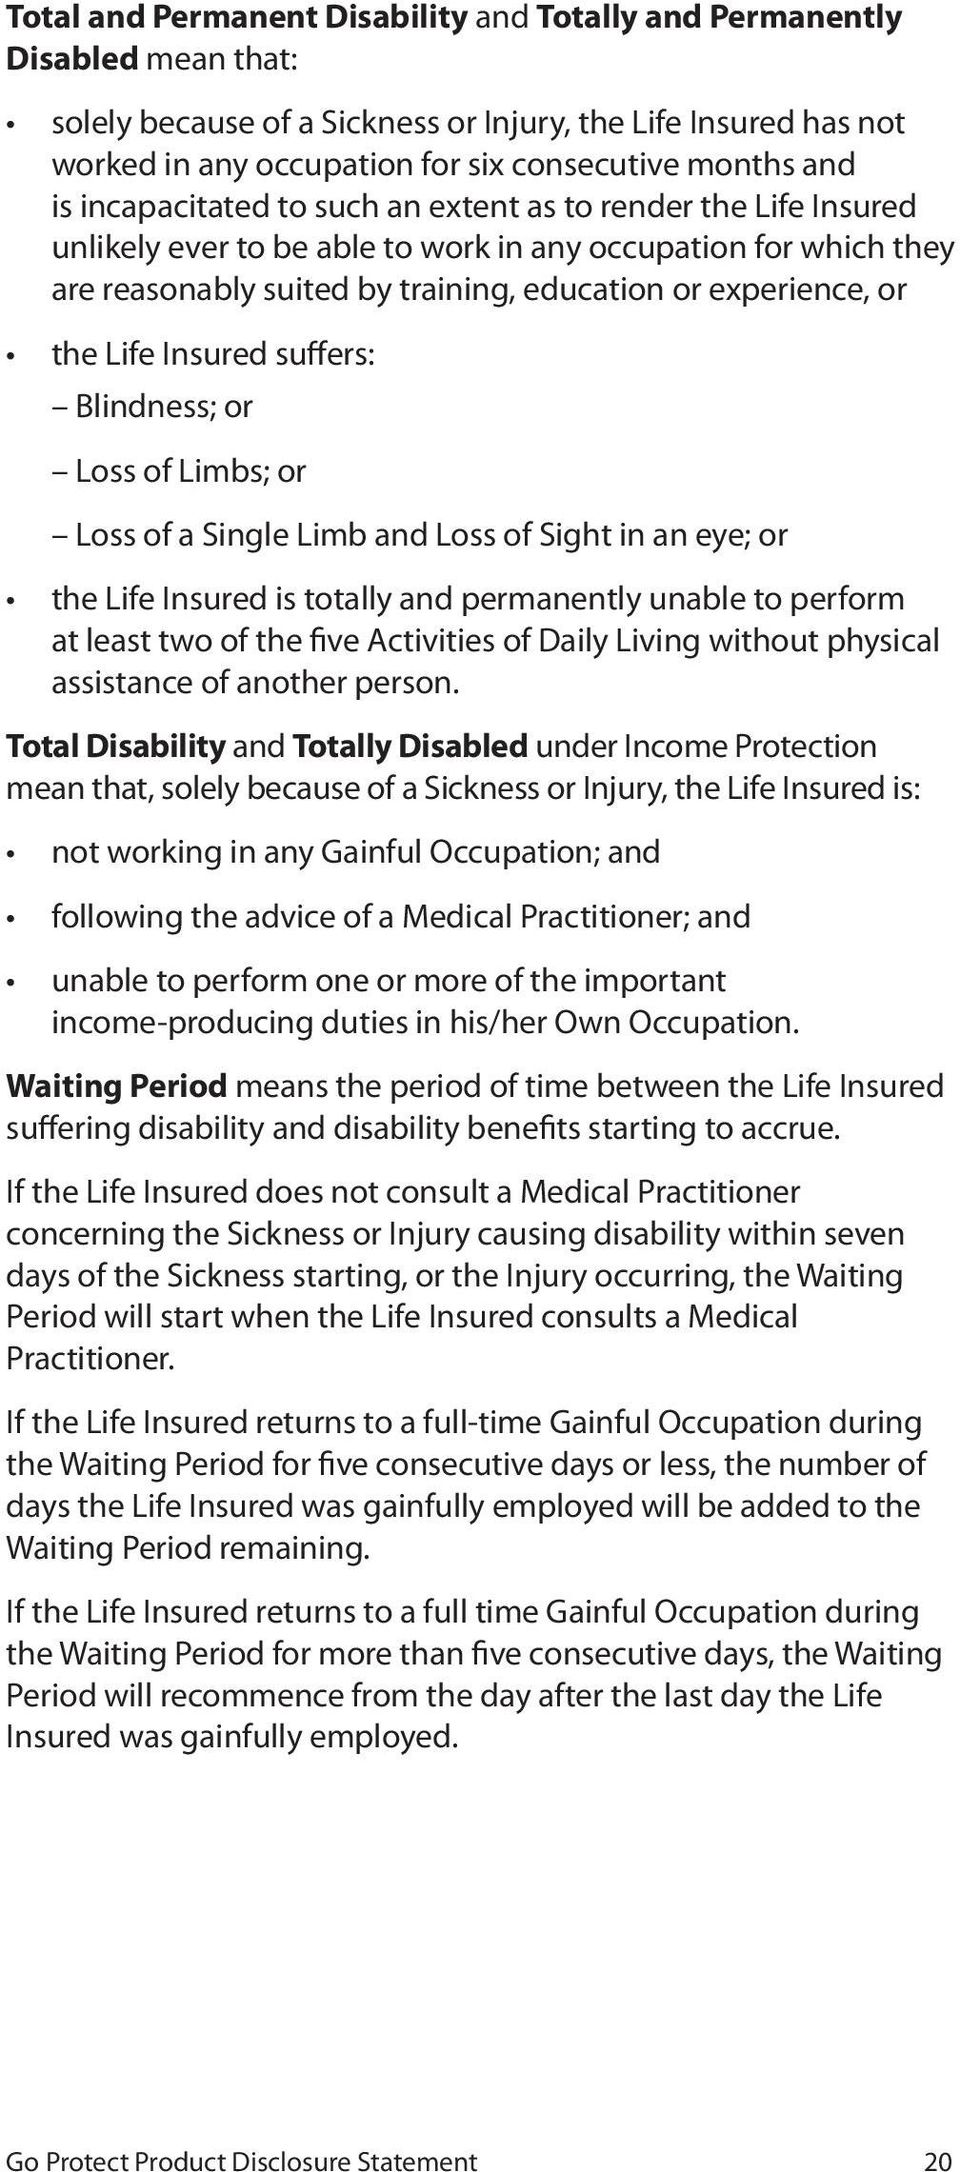 Life Insured suffers: Blindness; or Loss of Limbs; or Loss of a Single Limb and Loss of Sight in an eye; or the Life Insured is totally and permanently unable to perform at least two of the five